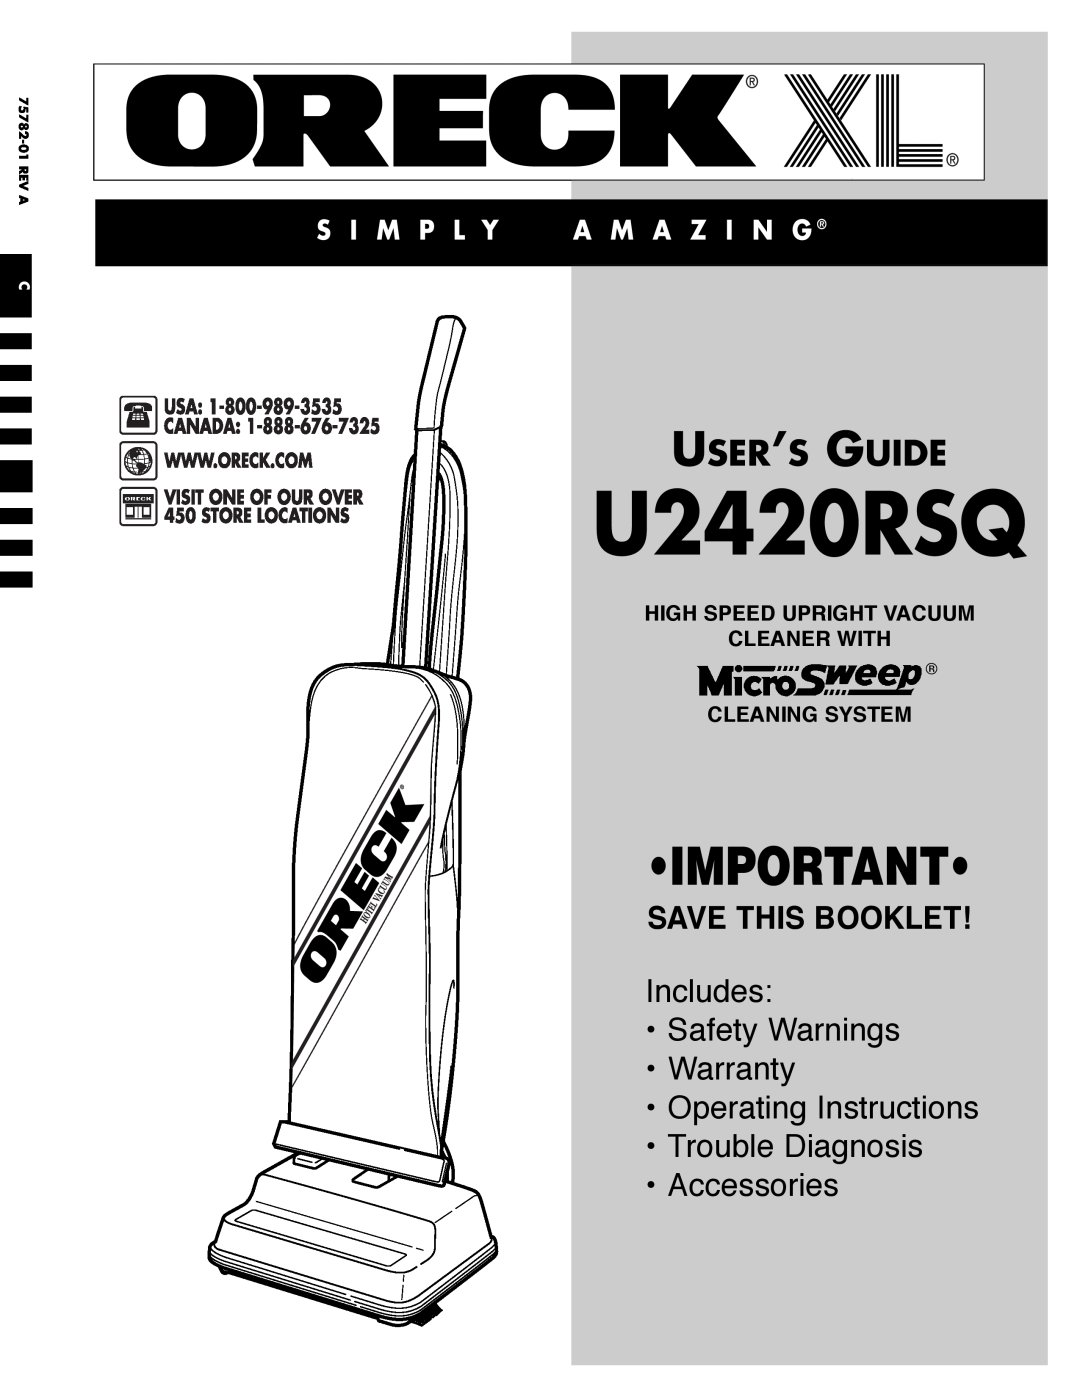 Oreck U2420RSQ warranty User’S Guide, S I M P L Y, A M A Z I N G, High Speed Upright Vacuum Cleaner With, Cleaning System 